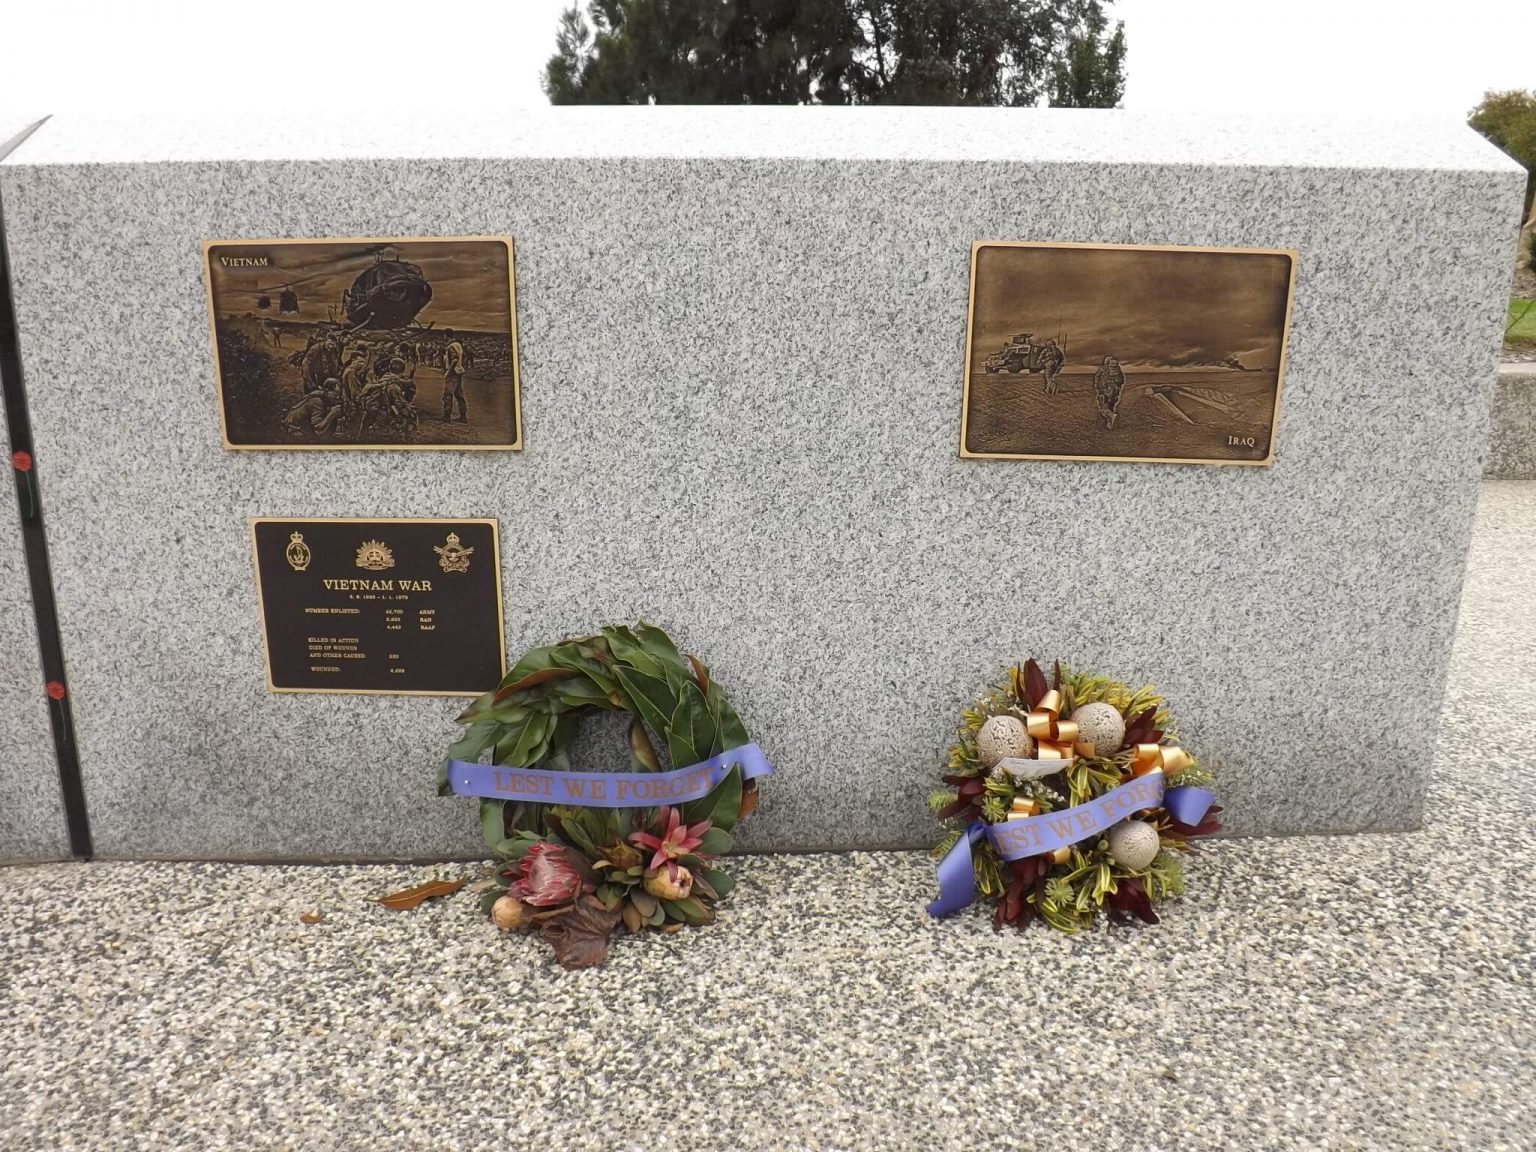 Granite Wall with three plaques on war and two wreaths at base